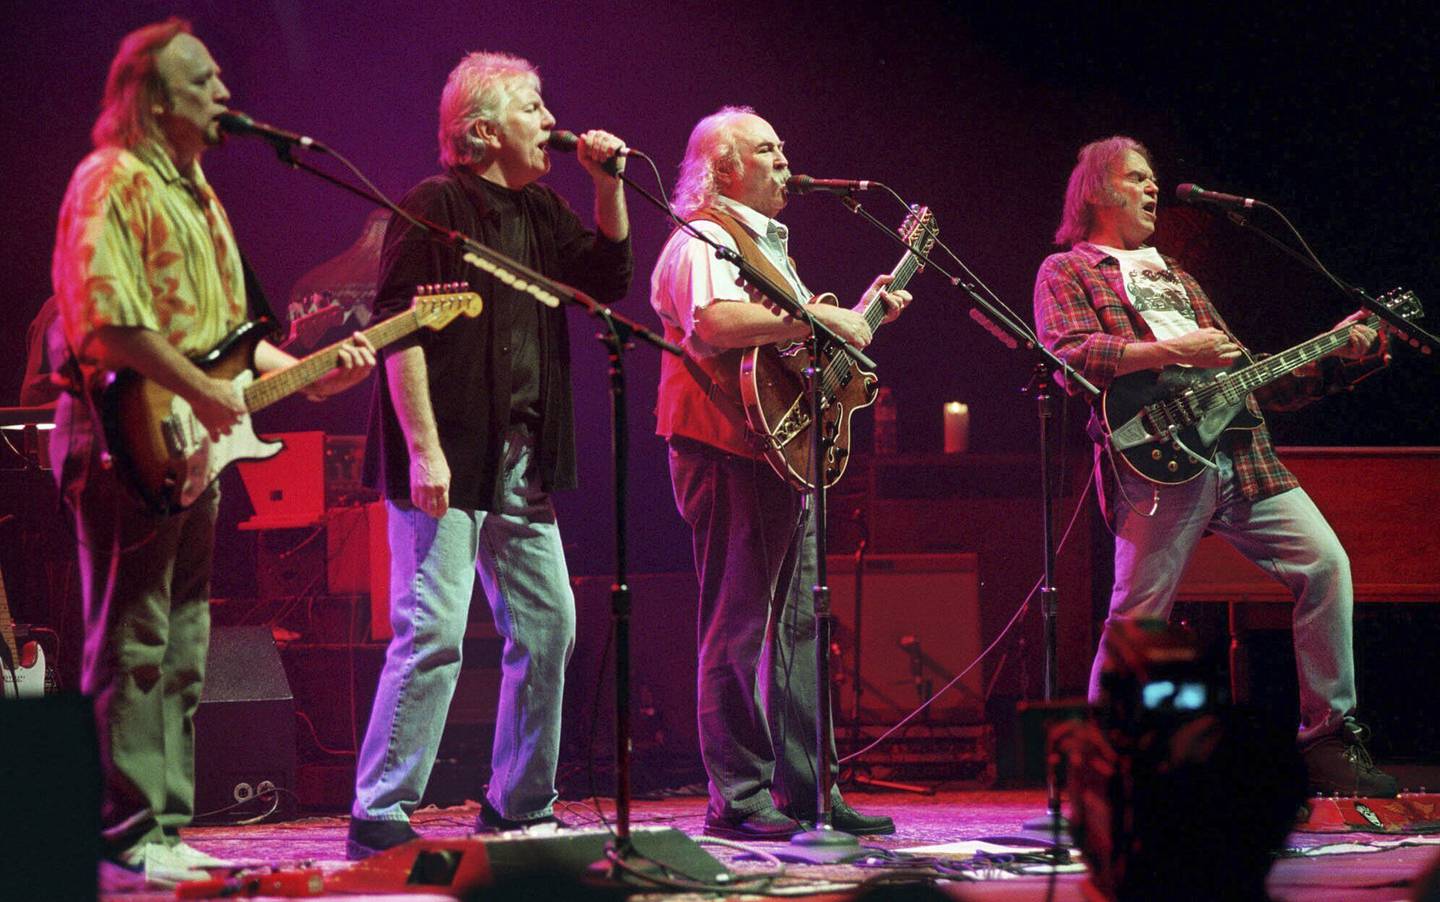 FILE - Stephens Stills, Graham Nash, David Crosby and Neil Young, from left, harmonize on a version of Young's "Southern Man" during a concert in Los Angeles, on Feb 12, 2000. Crosby, the brash rock musician who evolved from a baby-faced harmony singer with the Byrds to a mustachioed hippie superstar and an ongoing troubadour in Crosby, Stills, Nash & (sometimes) Young, has died at age 81. His death was reported Thursday, Jan. 19, 2023, by multiple outlets. (AP Photo/E.J. Flynn, File)